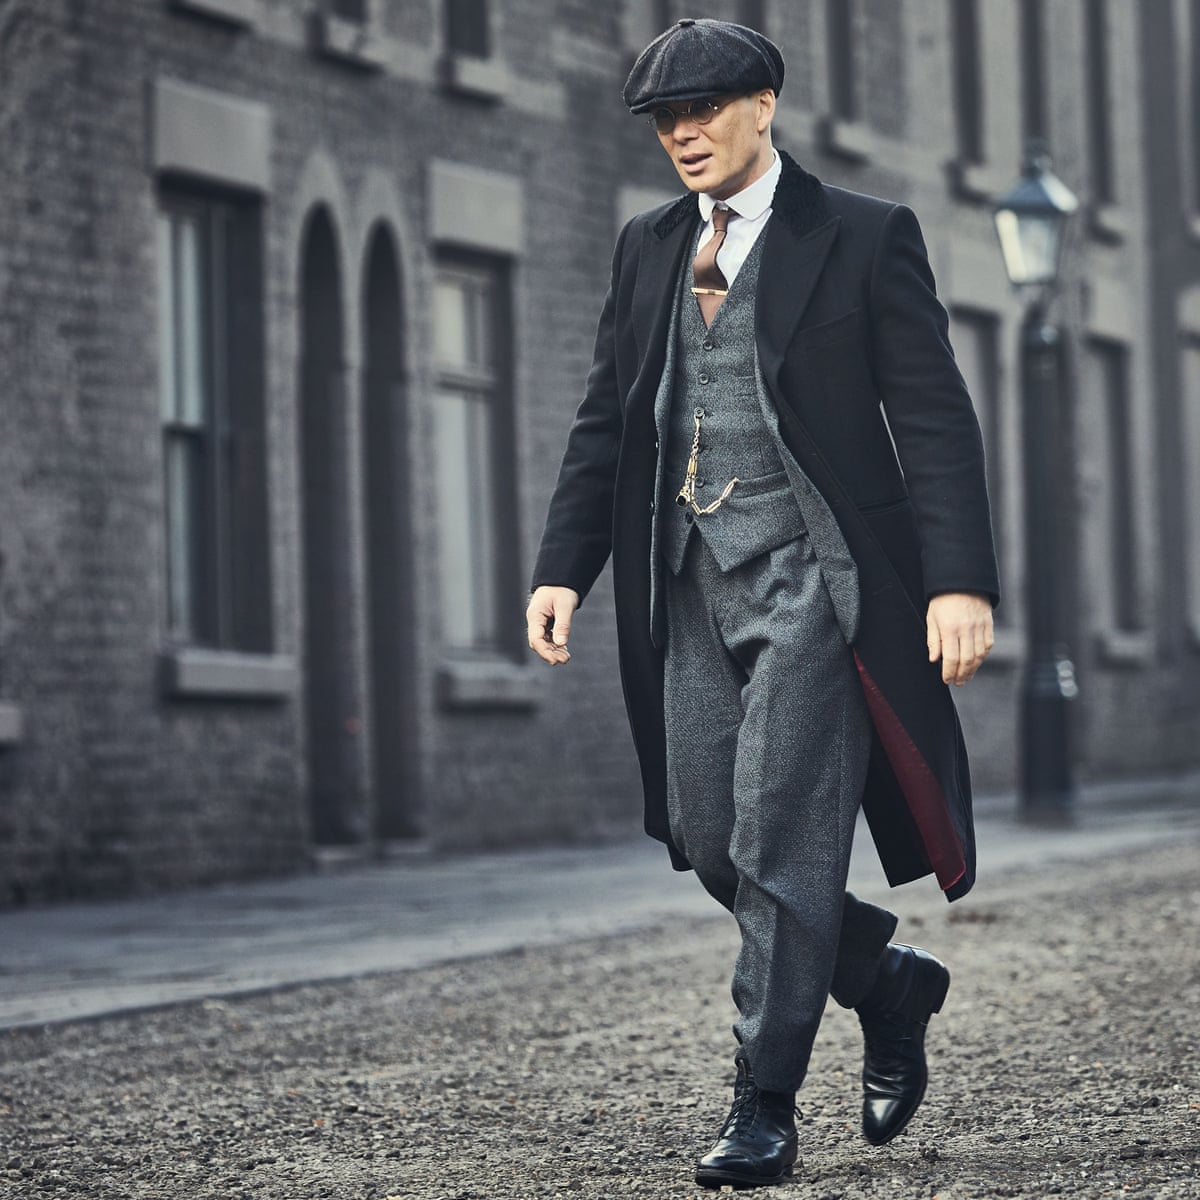 Black modern morning suit with hounds tooth pants and vest